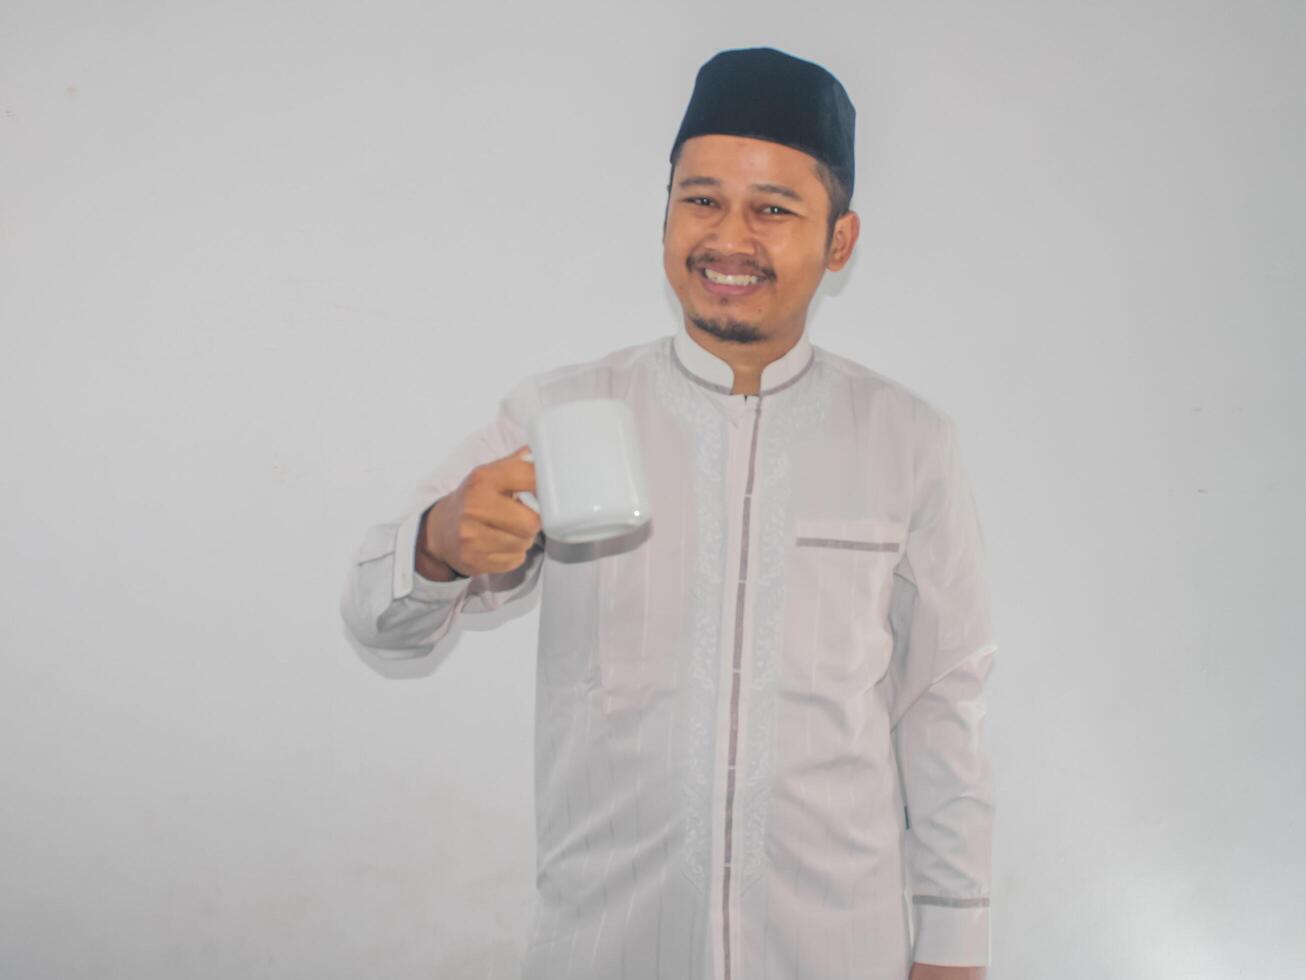 Moslem Asian man smiling at the camera while holding a drinking glass photo